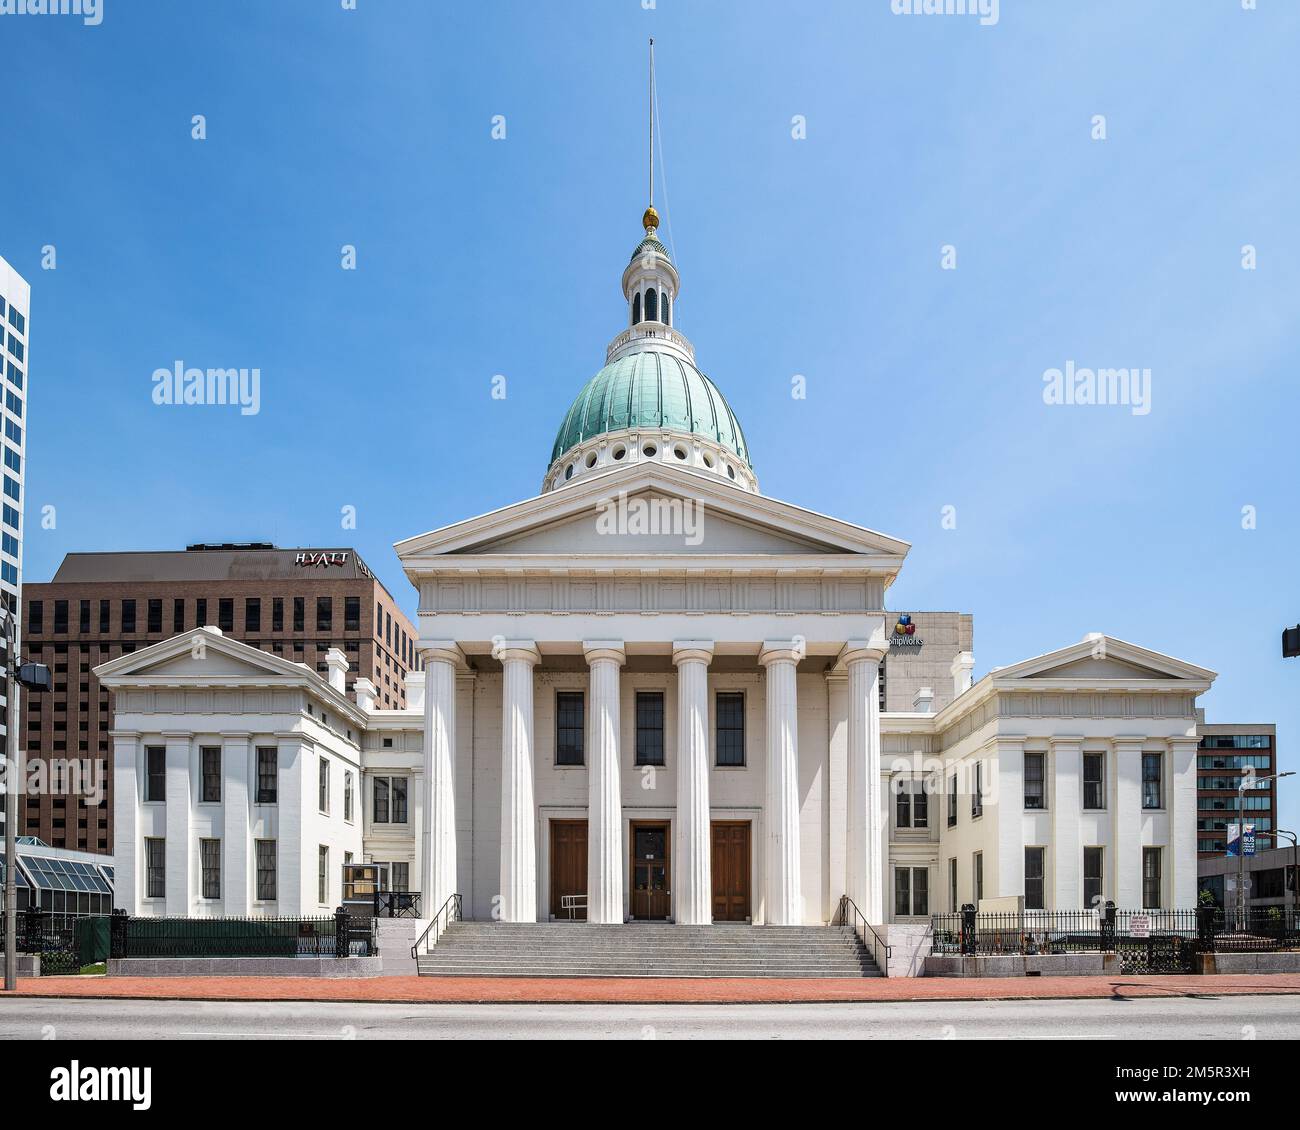 The Old Courthouse in downtown St. Louis is listed on National Park Service's National Underground Railroad Network to Freedom from the 1800's. Stock Photo